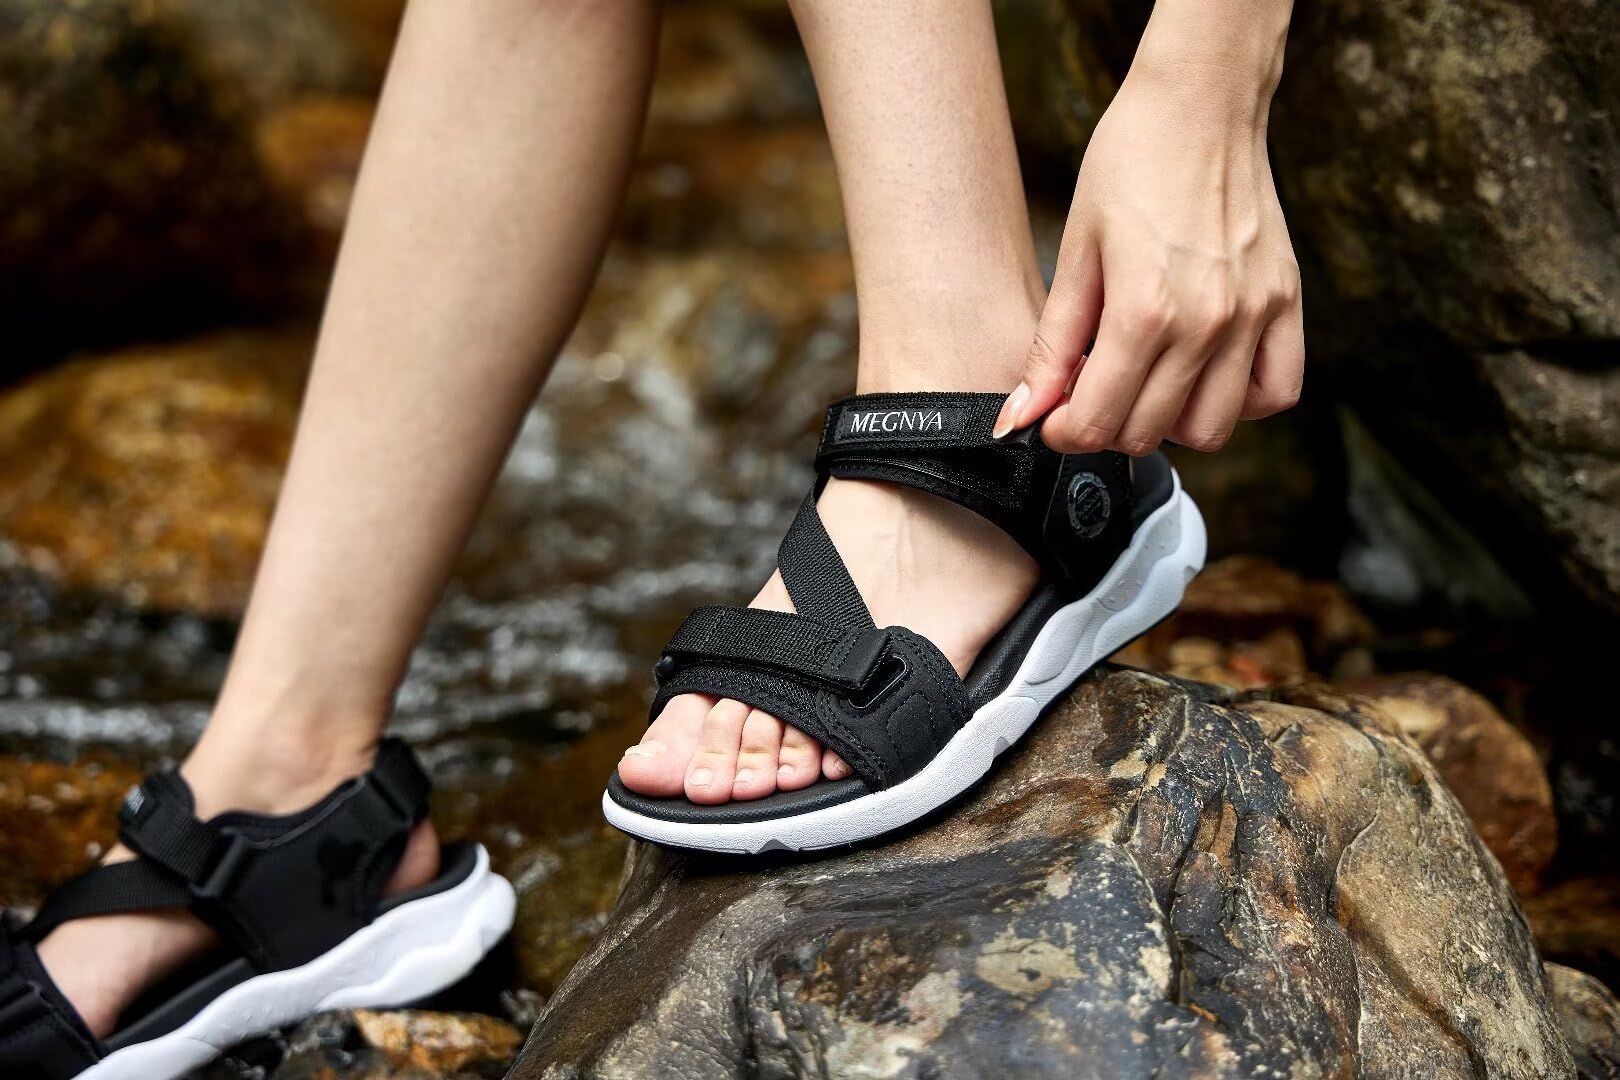 MEGNYA Arch Supportive Walking Sandals for Womens, Thickening Outsole Sandals for Summer Dress, Anti Slip and Shock Absorber Hiking Sandals for Vacation Black Size 8